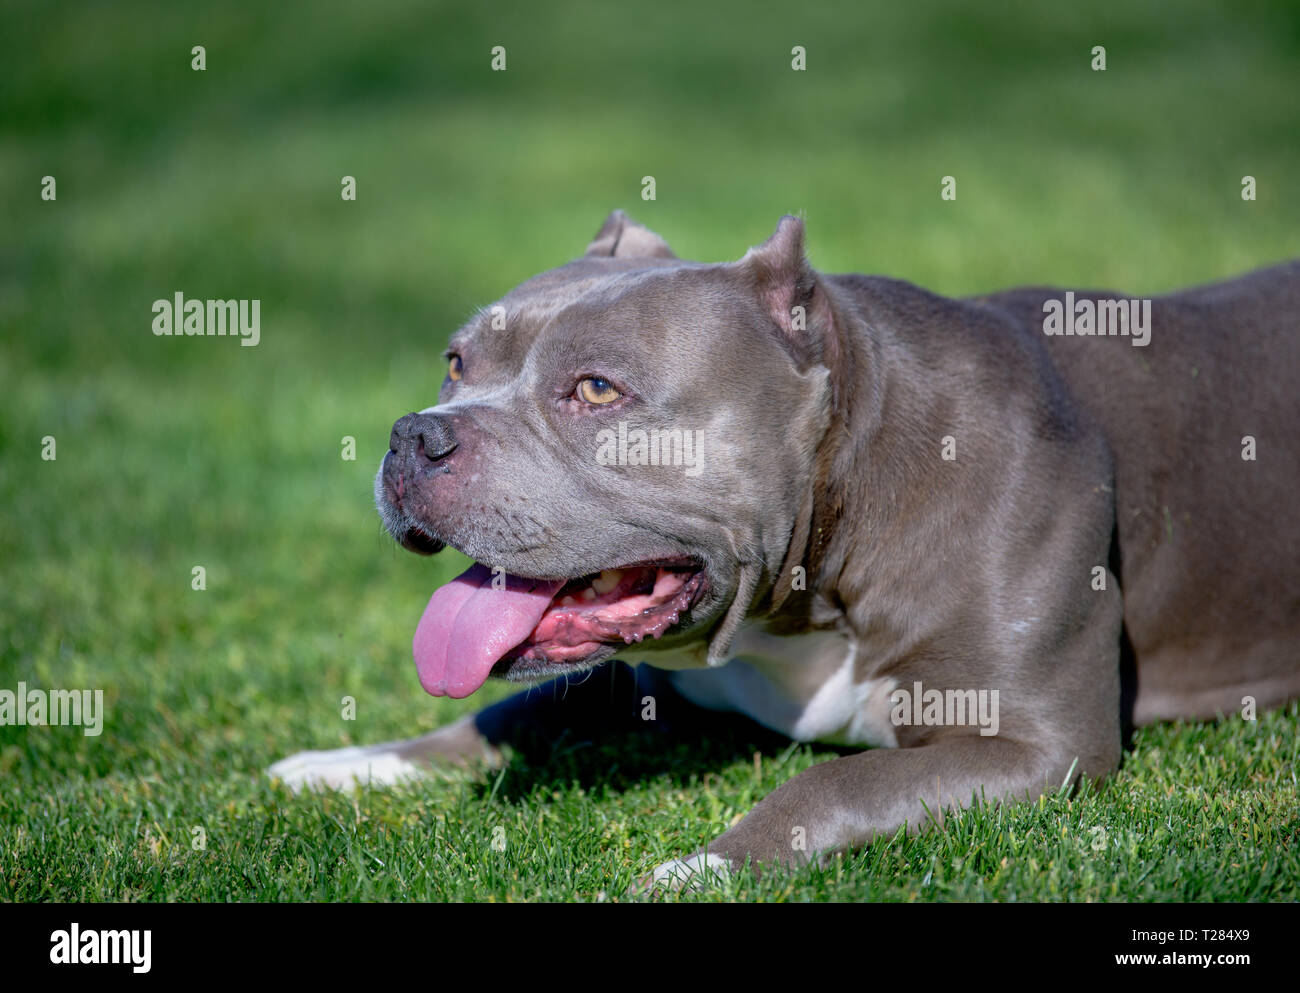 Profile portrait of a dog lying in the grass Stock Photo